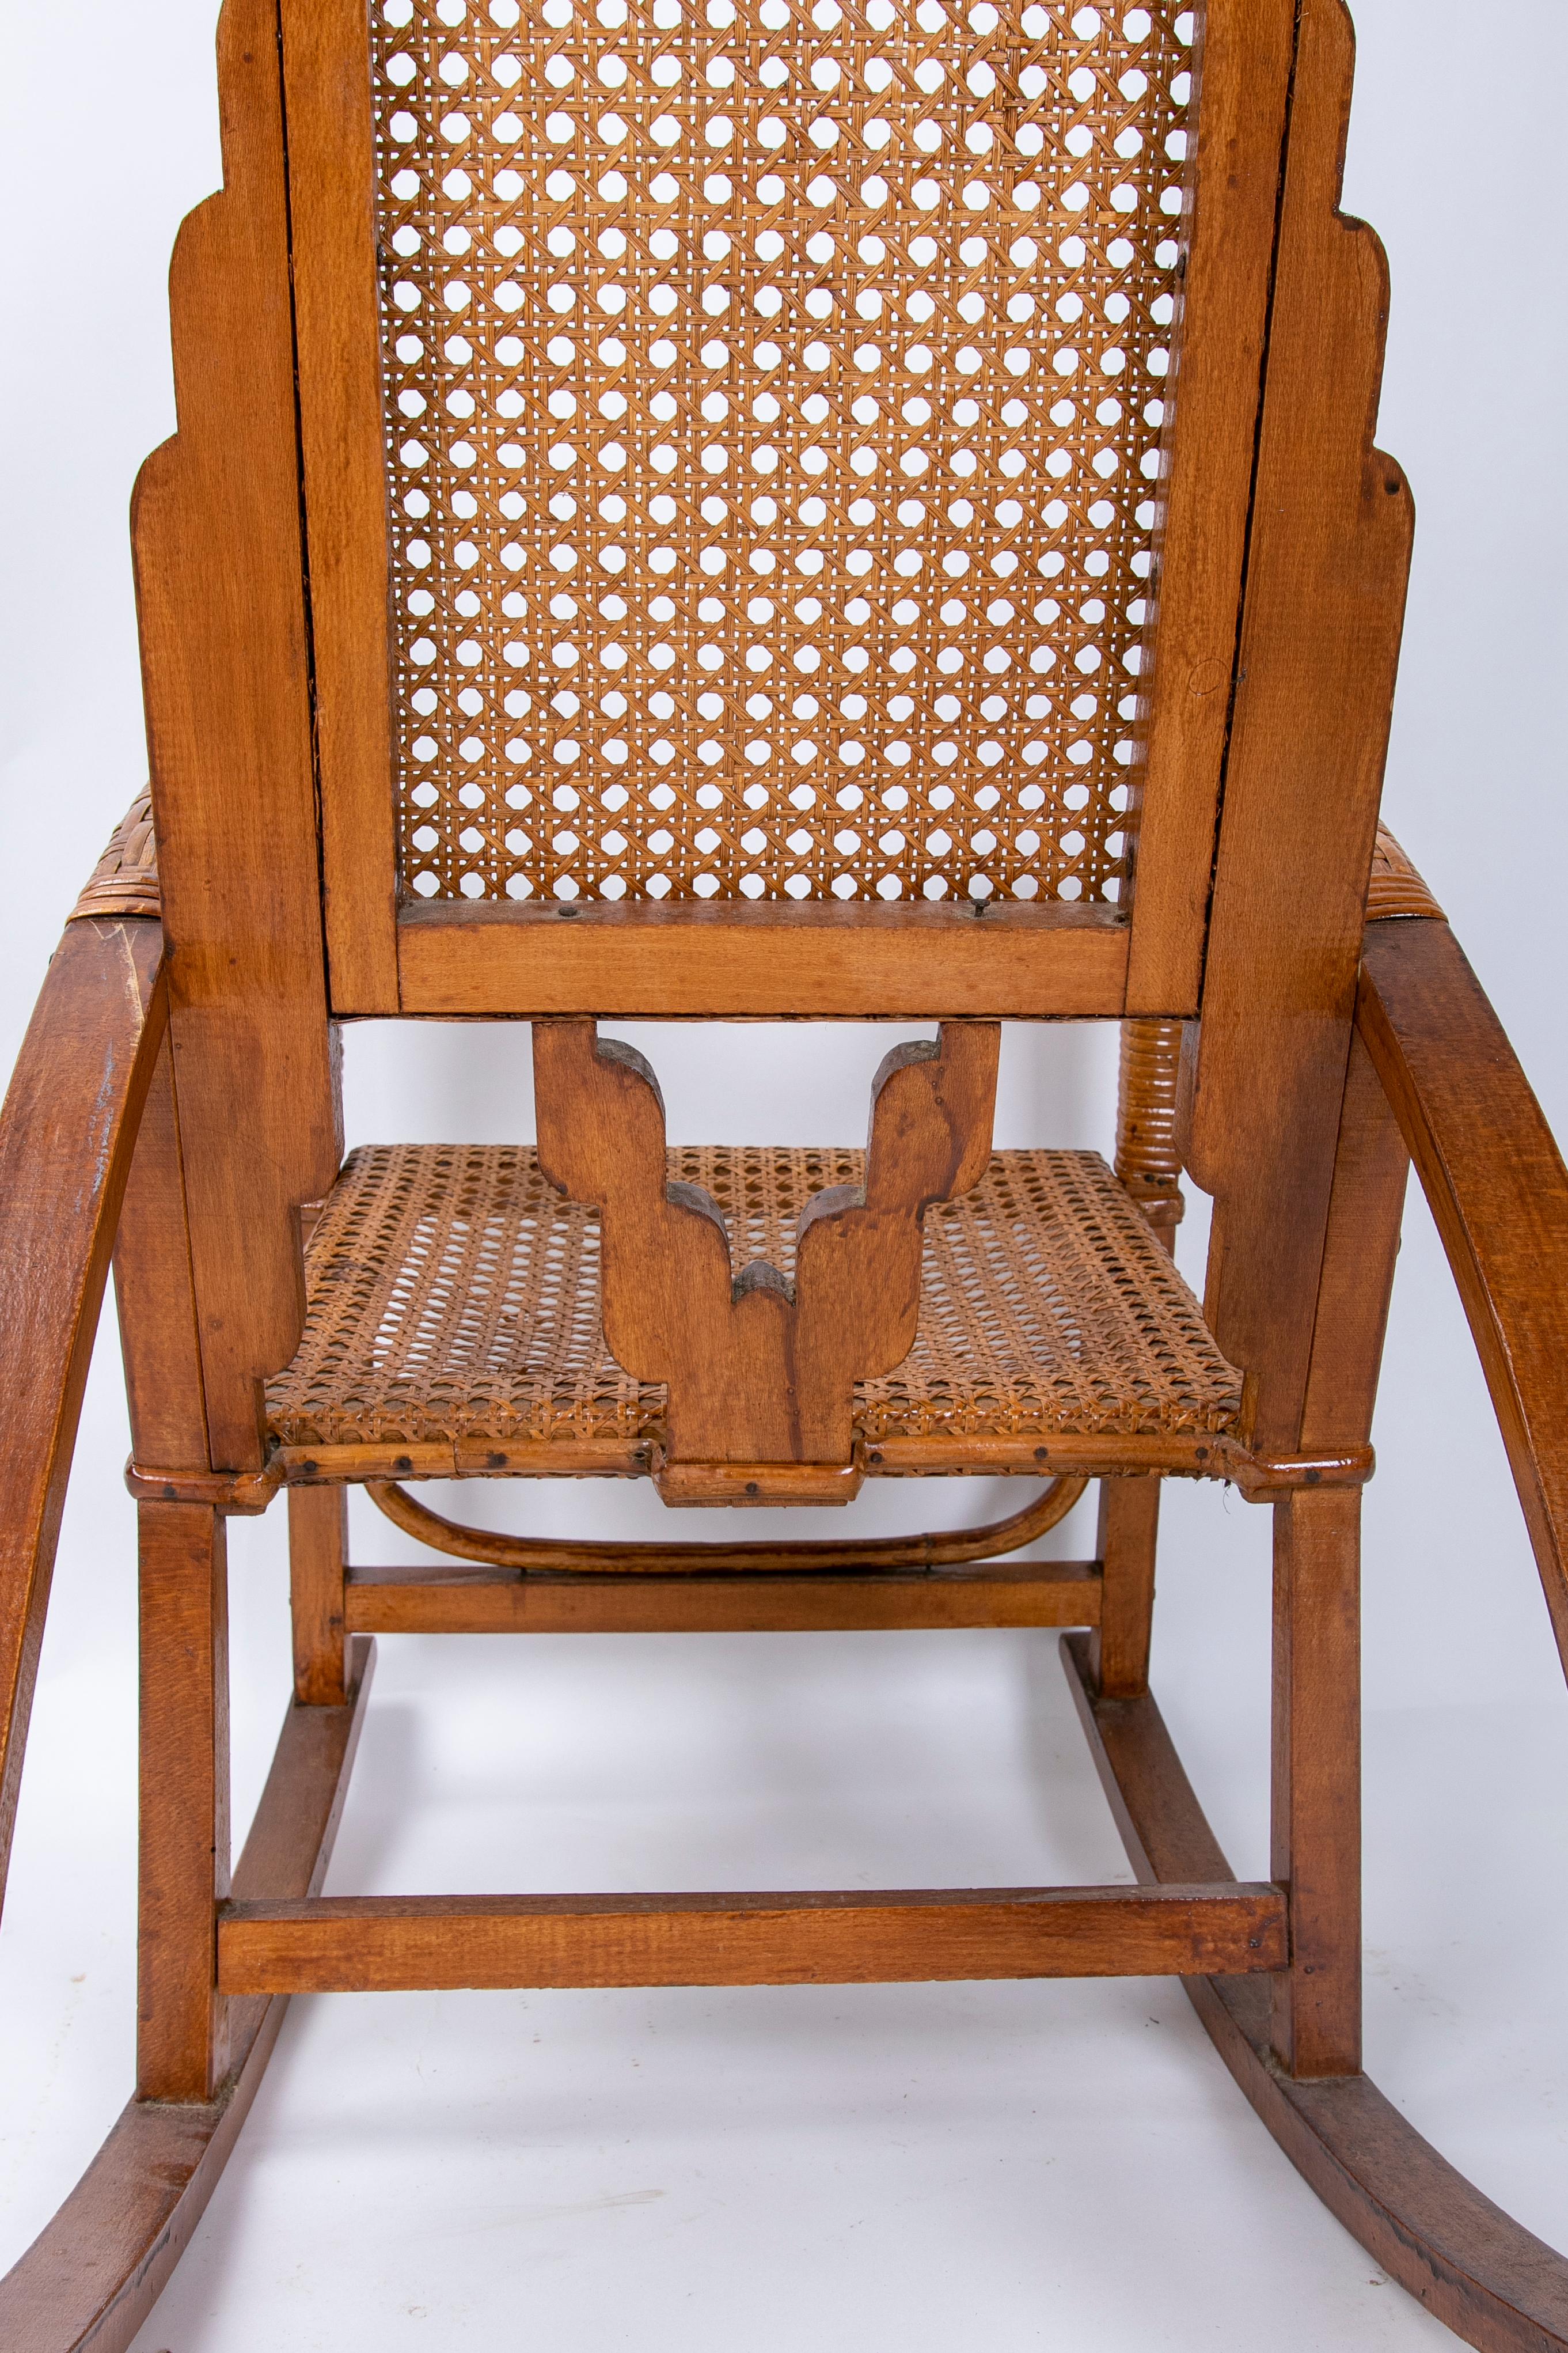 1980s Bamboo, Wood and Wicker Children's Rocking Chair For Sale 4